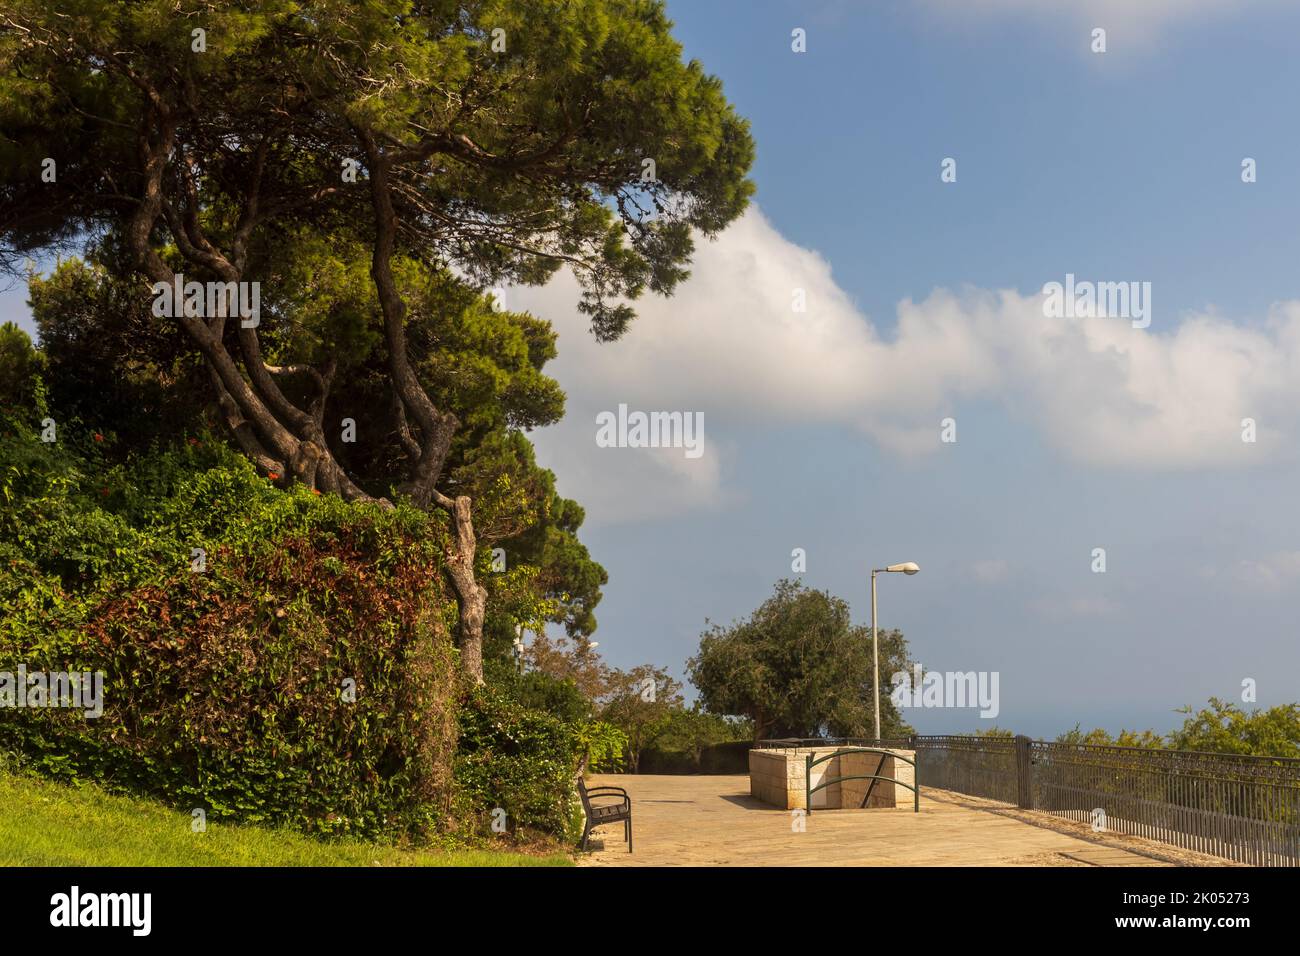 Huge pine tree along the promenade above the sea, sky with clouds, southern landscape Stock Photo